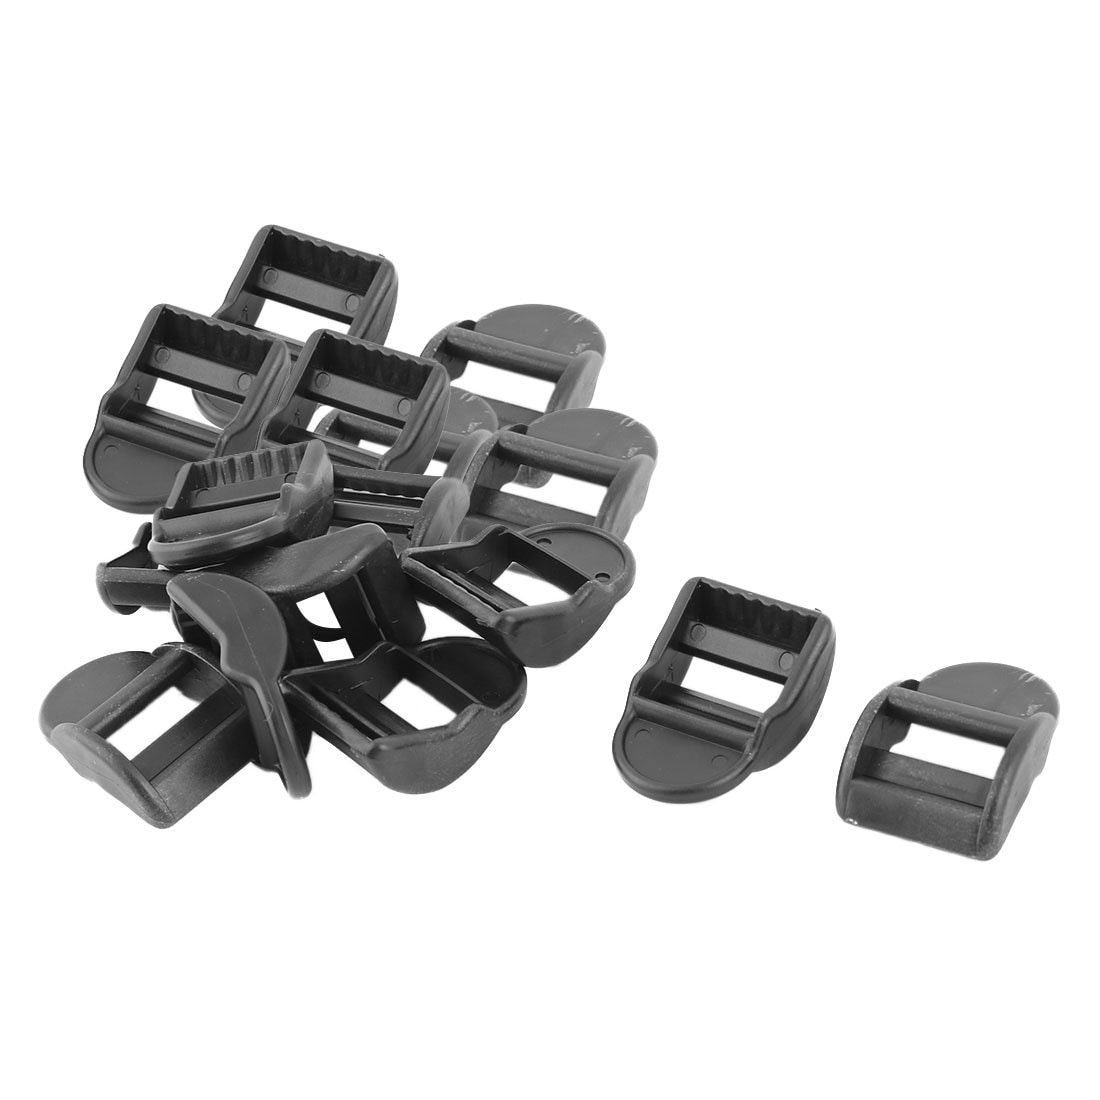 6 Pieces) Gear Aid Dual-Adjust Tension Replacement Backpack Buckle